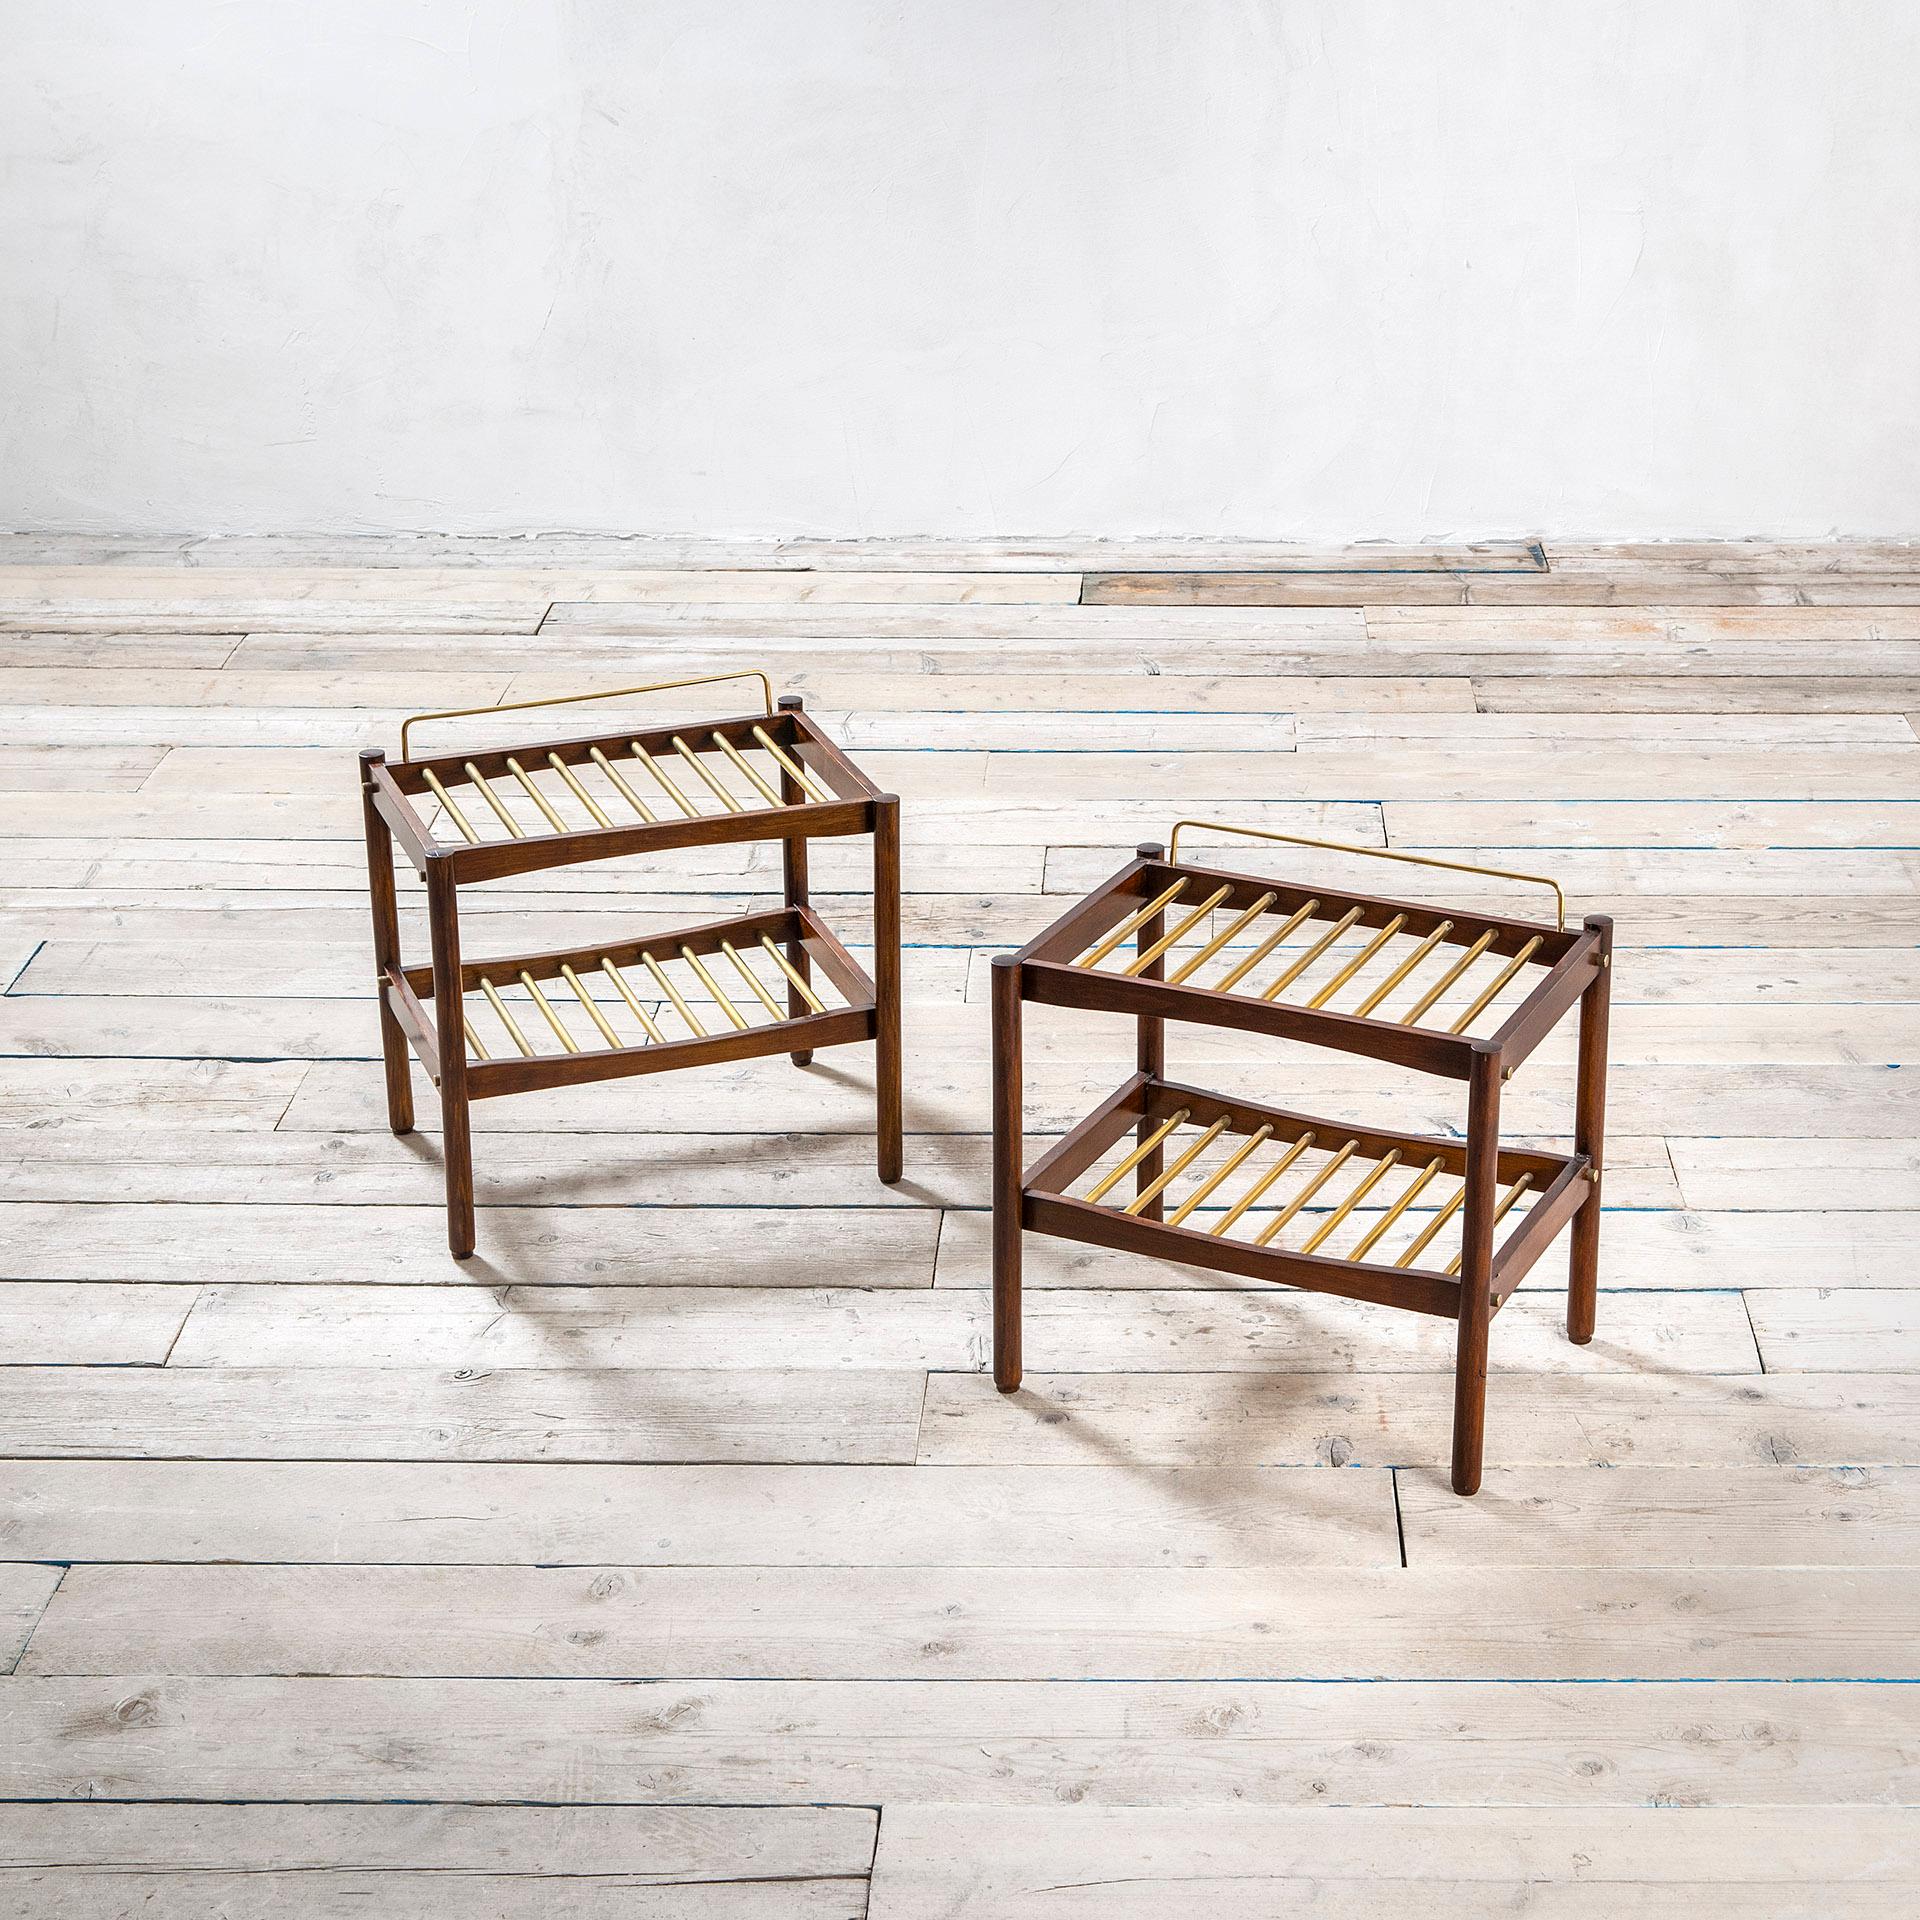 Pair of Luggage Racks in wood and brass. This couple of Luggage Racks are original from a city-centered hotel in Naples, Italy. The suitcase holders are of the middle '50s, designed by ISA Bergamo. Due to a new renovation, the hotel decided to sell